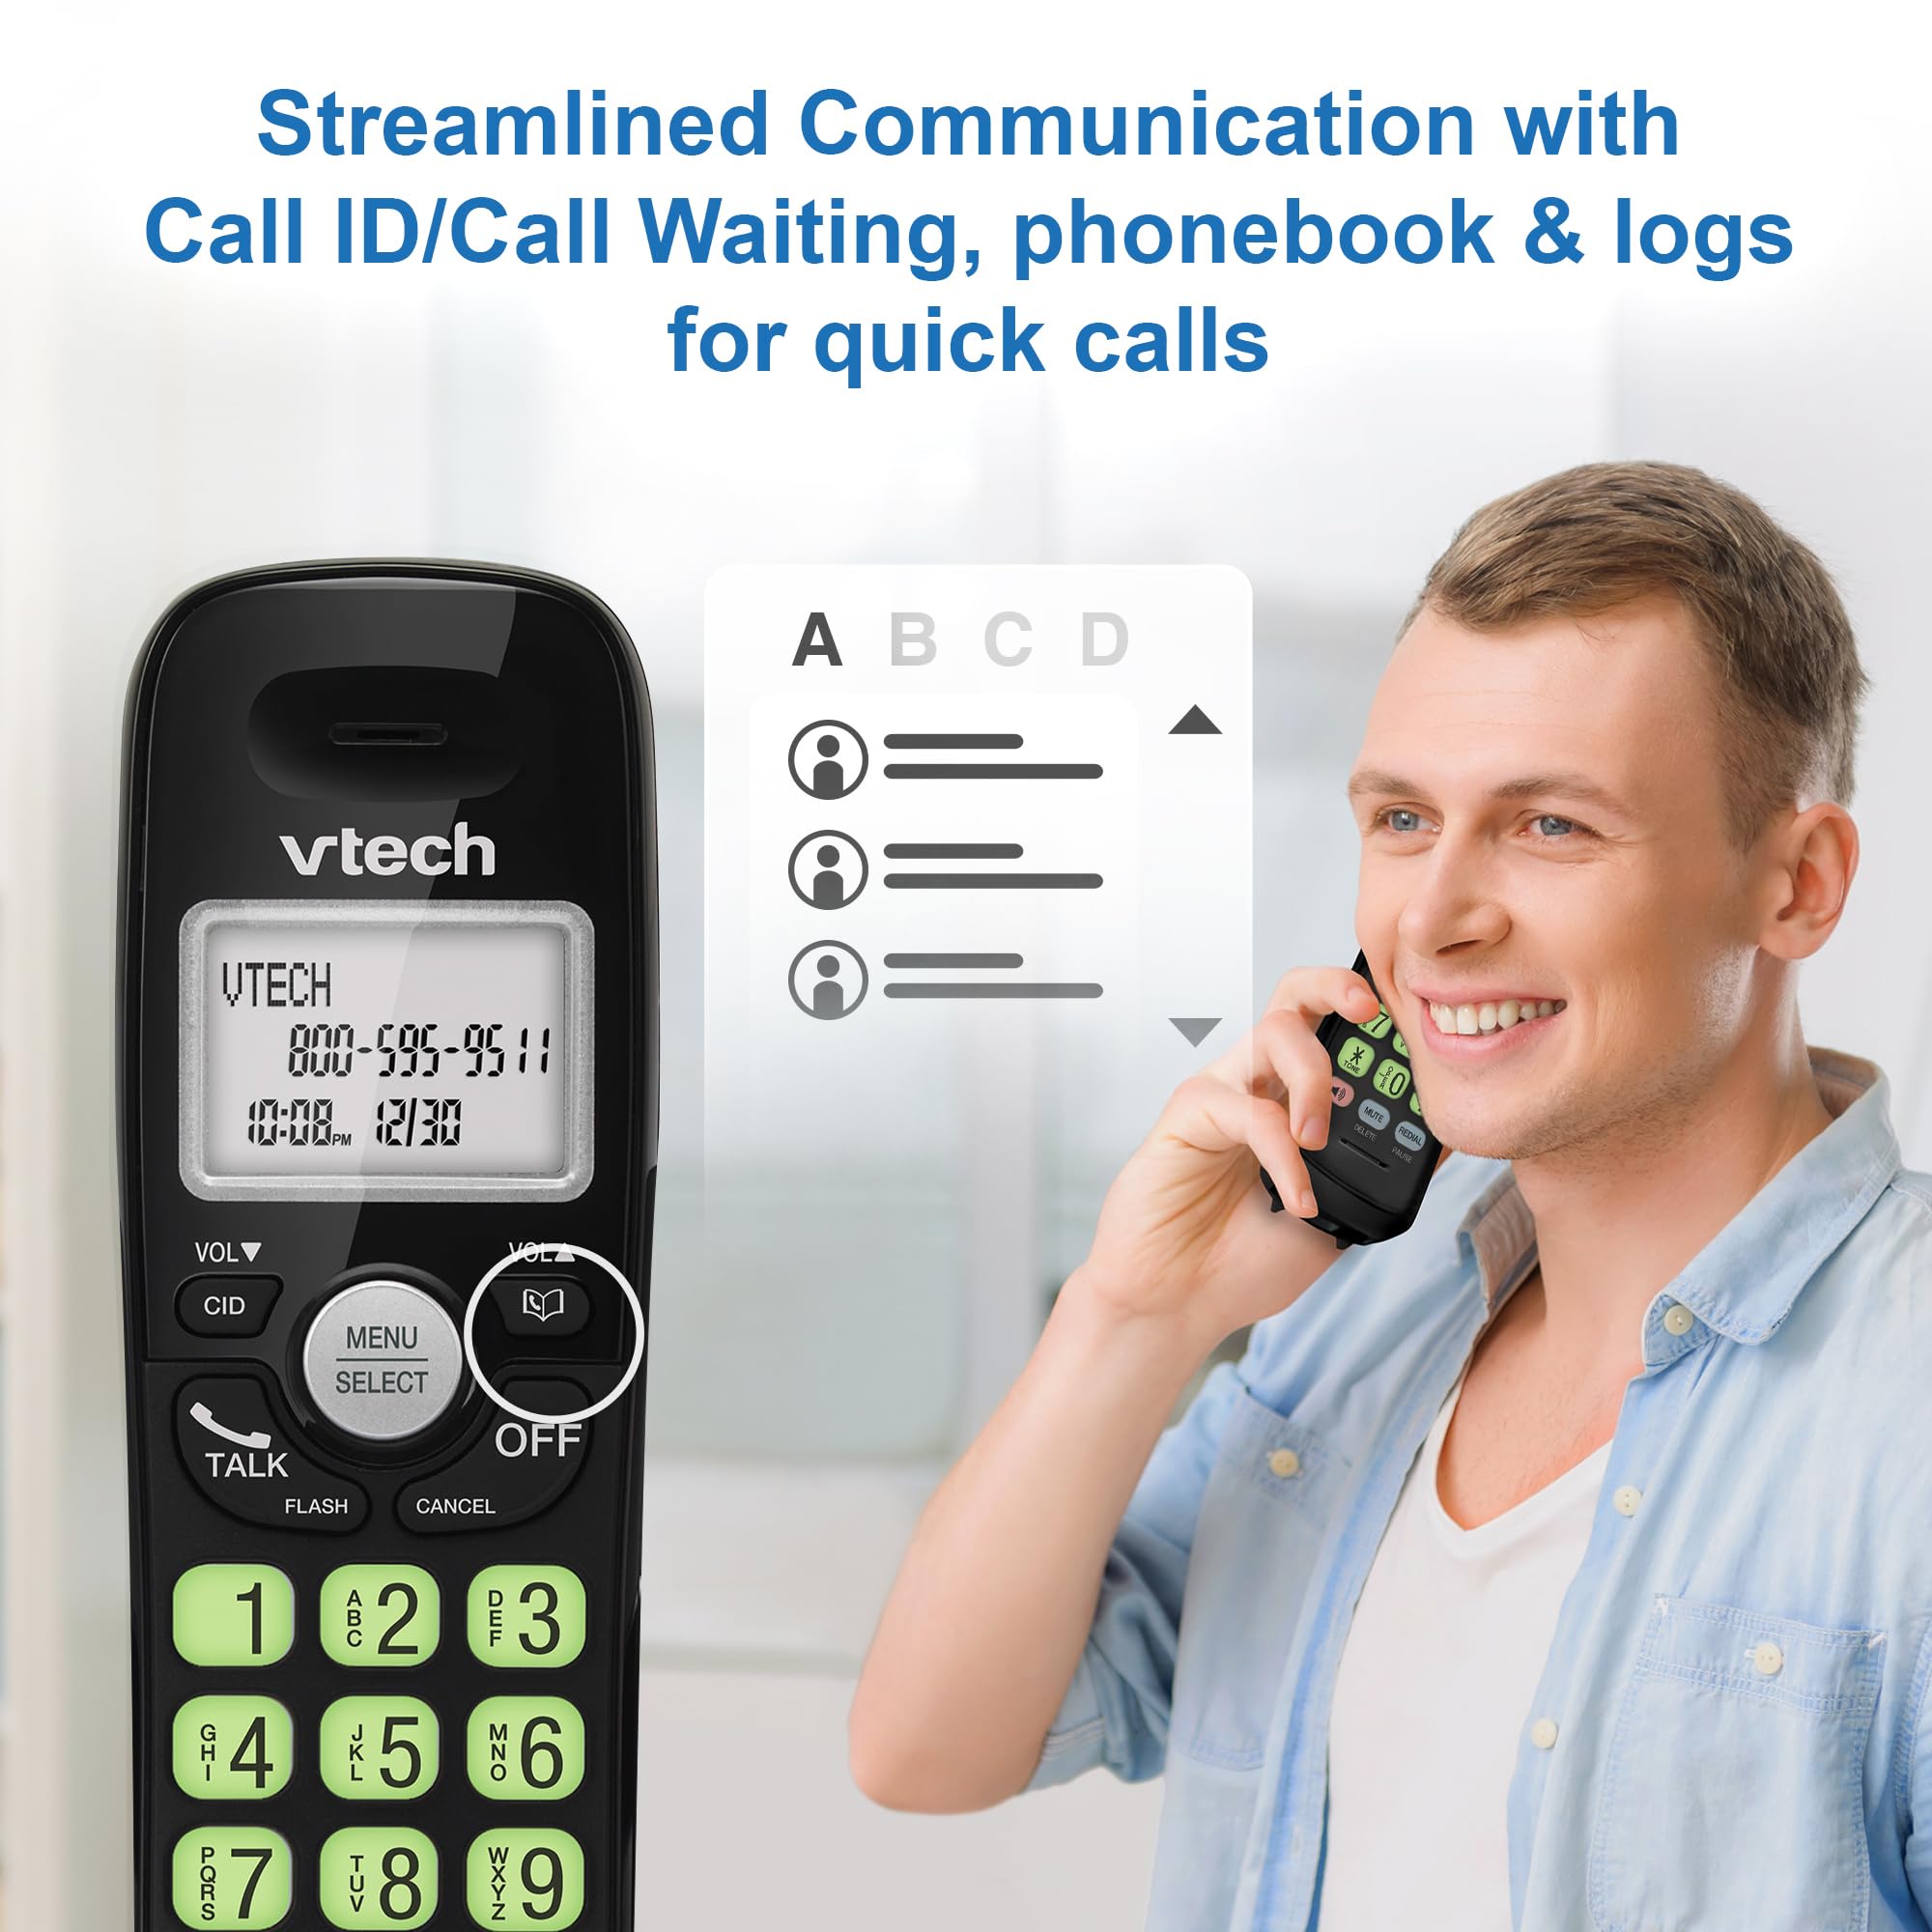 VTech DECT 6.0 Cordless Phone - Bluetooth Connection, Blue Display, Big Buttons, Full Duplex, Caller ID, Easy Wall Mount, 1000ft Range